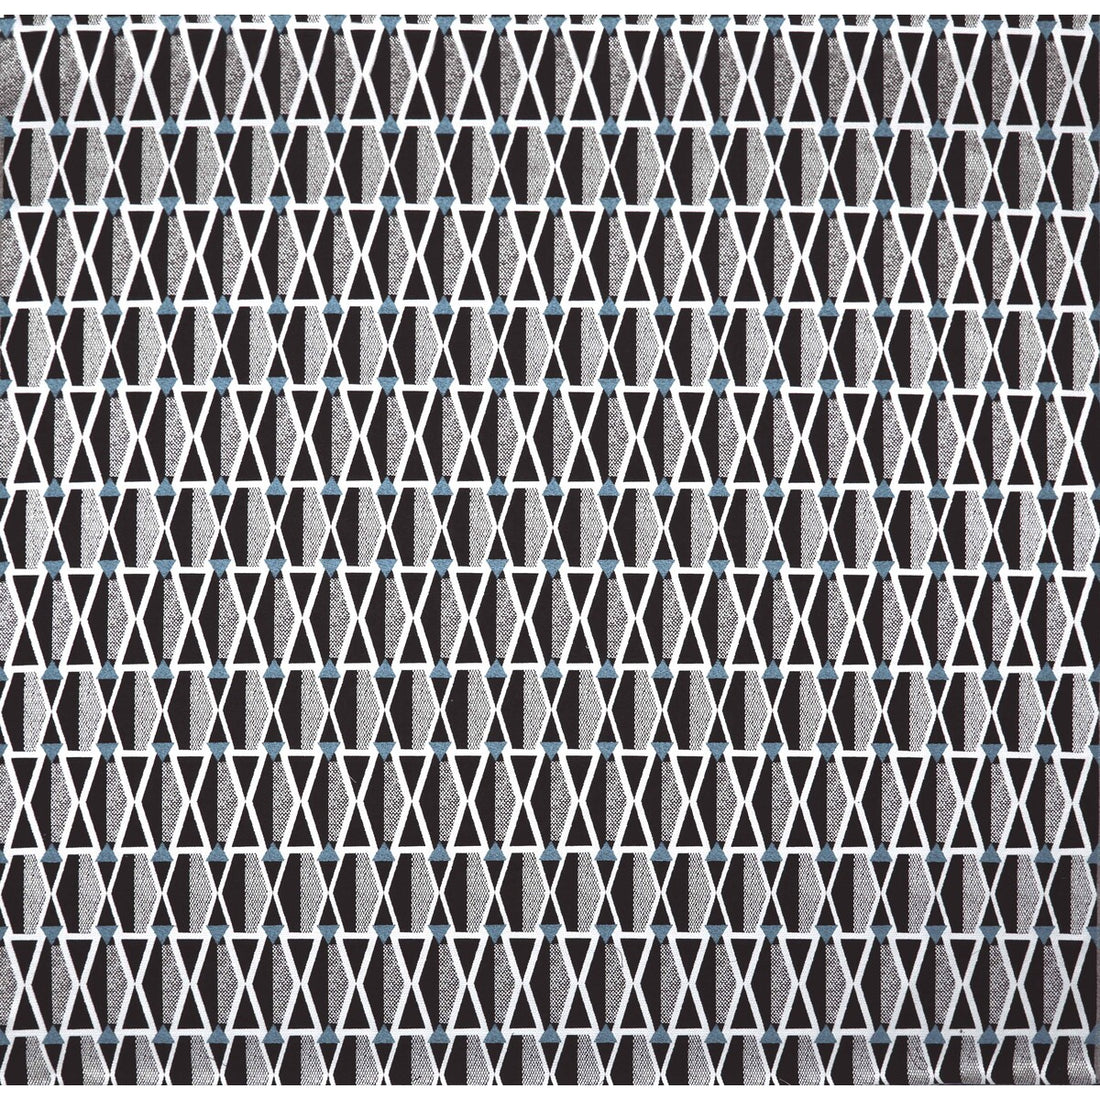 Hepburn fabric in gris color - pattern GDT5397.1.0 - by Gaston y Daniela in the Gaston Africalia collection